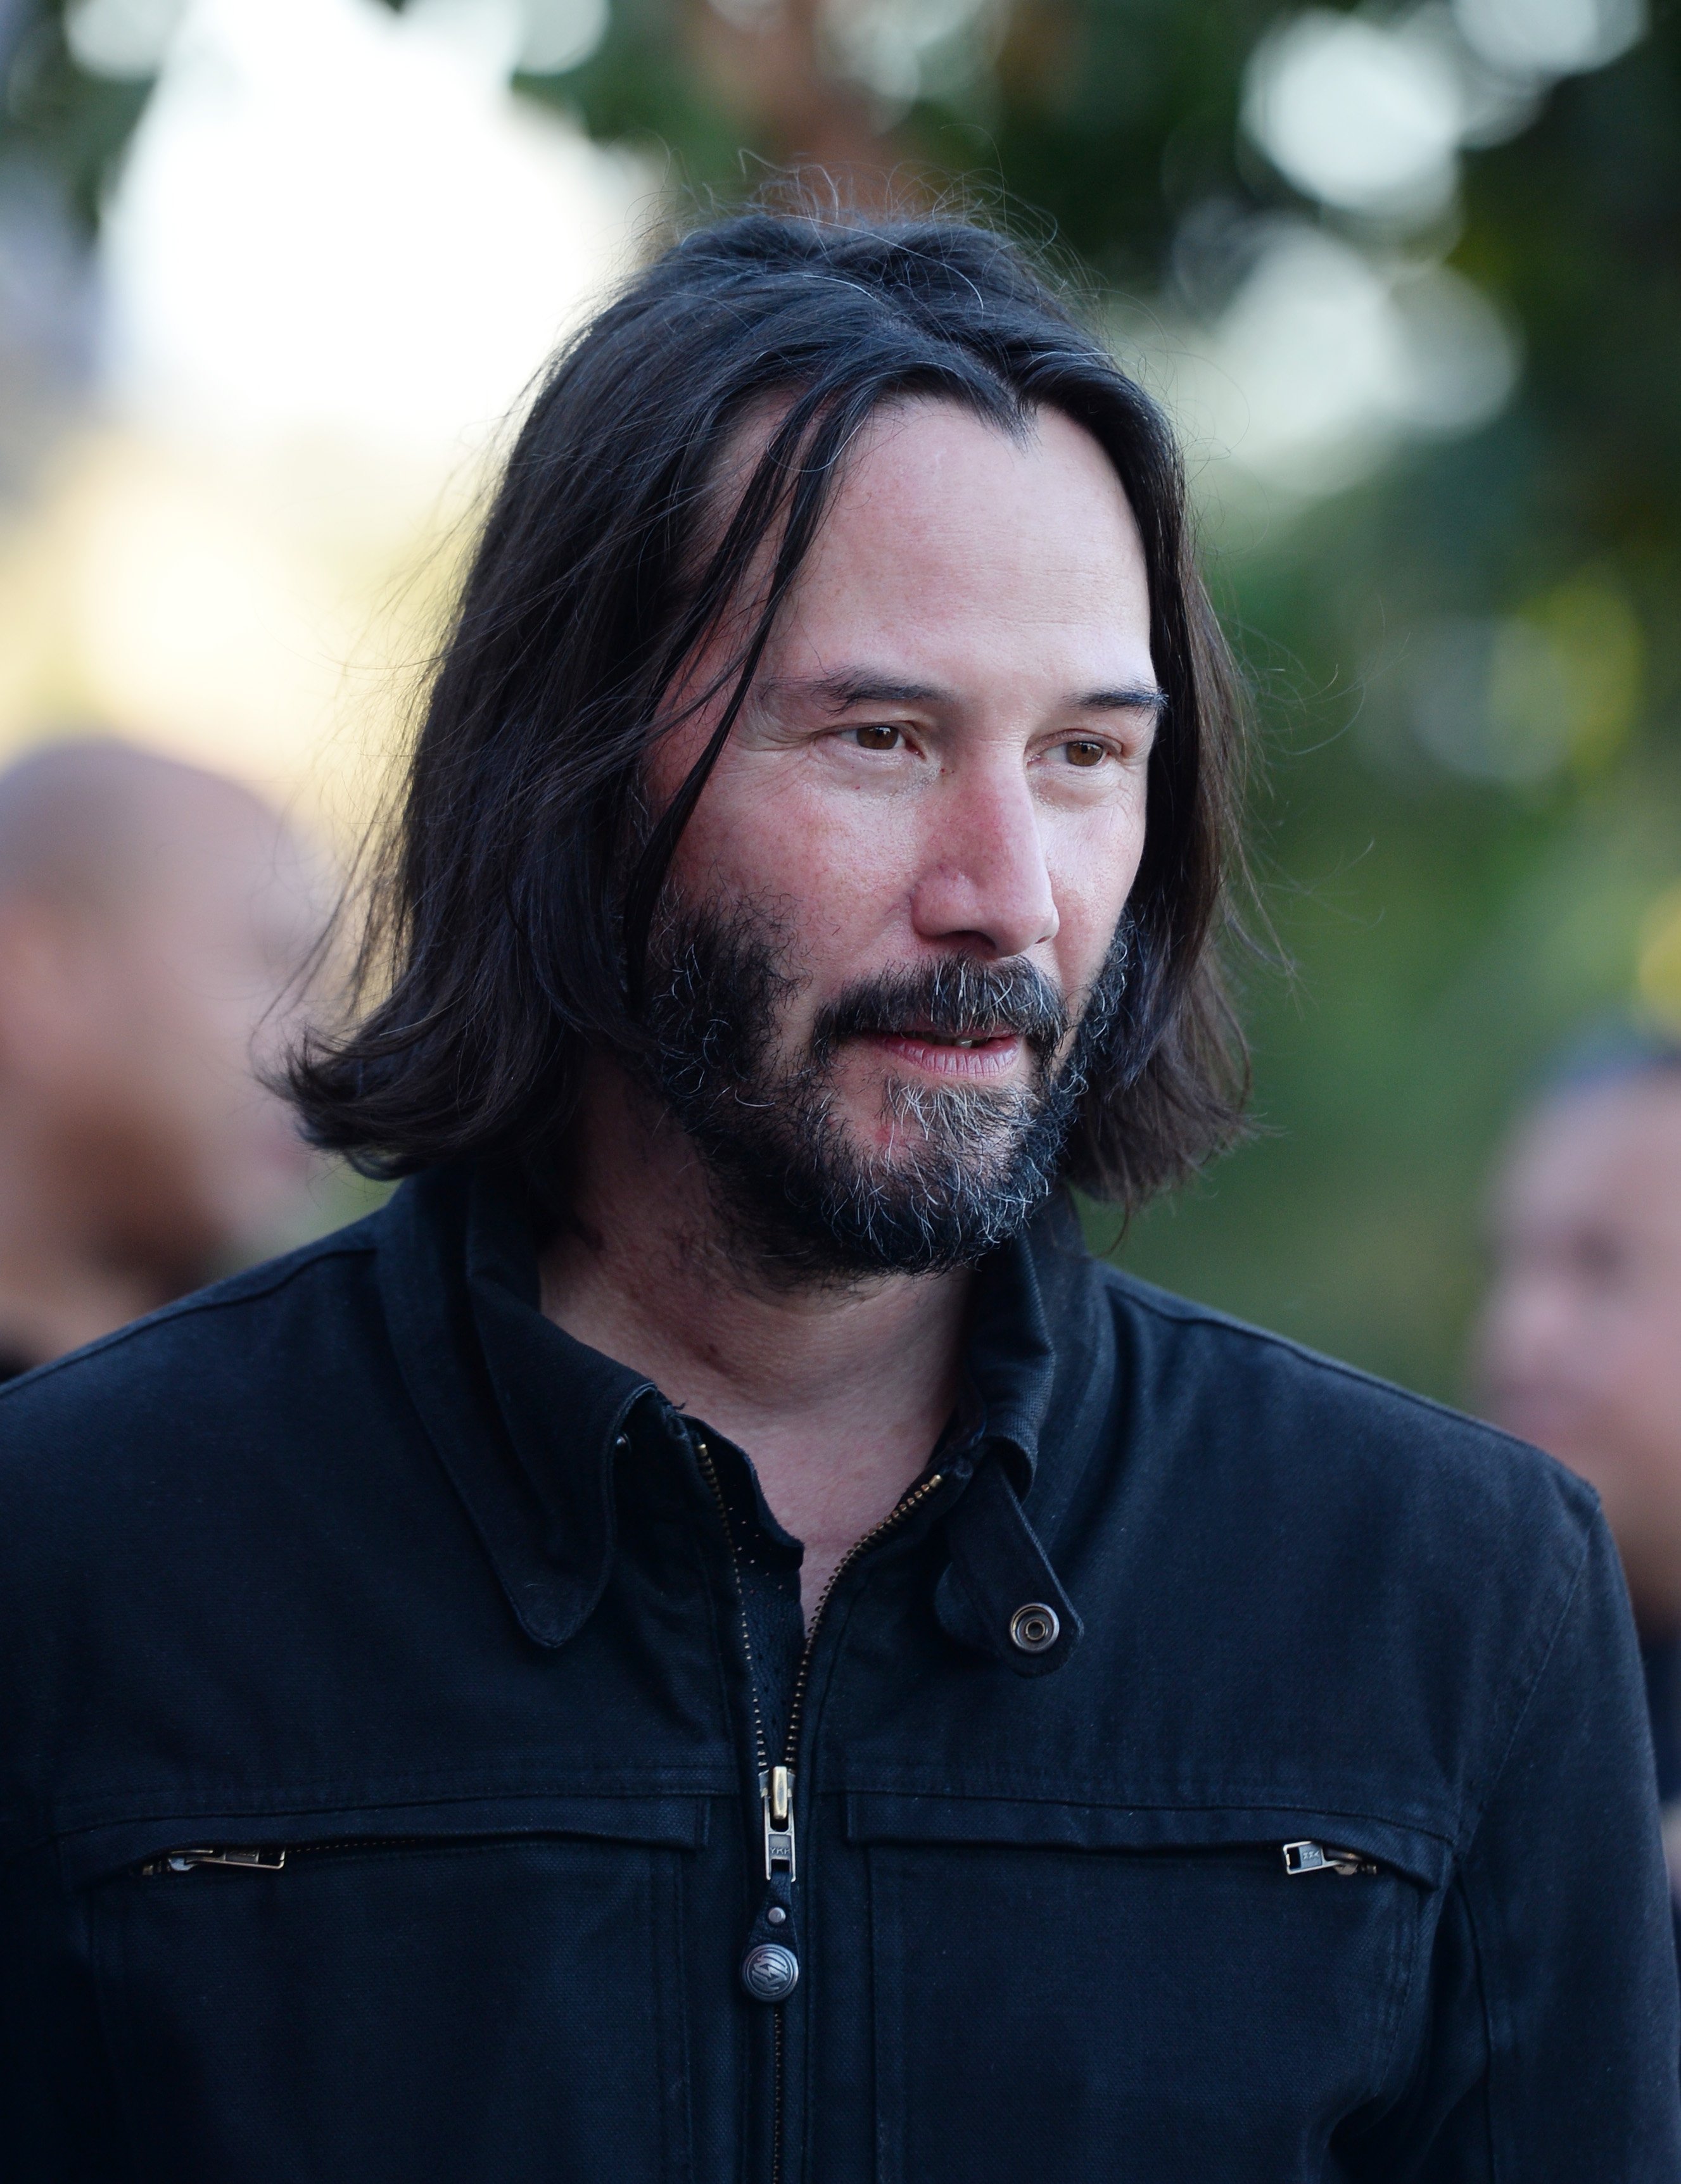 Keanu Reeves arrives at the LA Special Screening of Amazon's "Too Old To Die Young" at the Vista Theatre on June 10, 2019, in Los Angeles, California. | Source: Getty Images